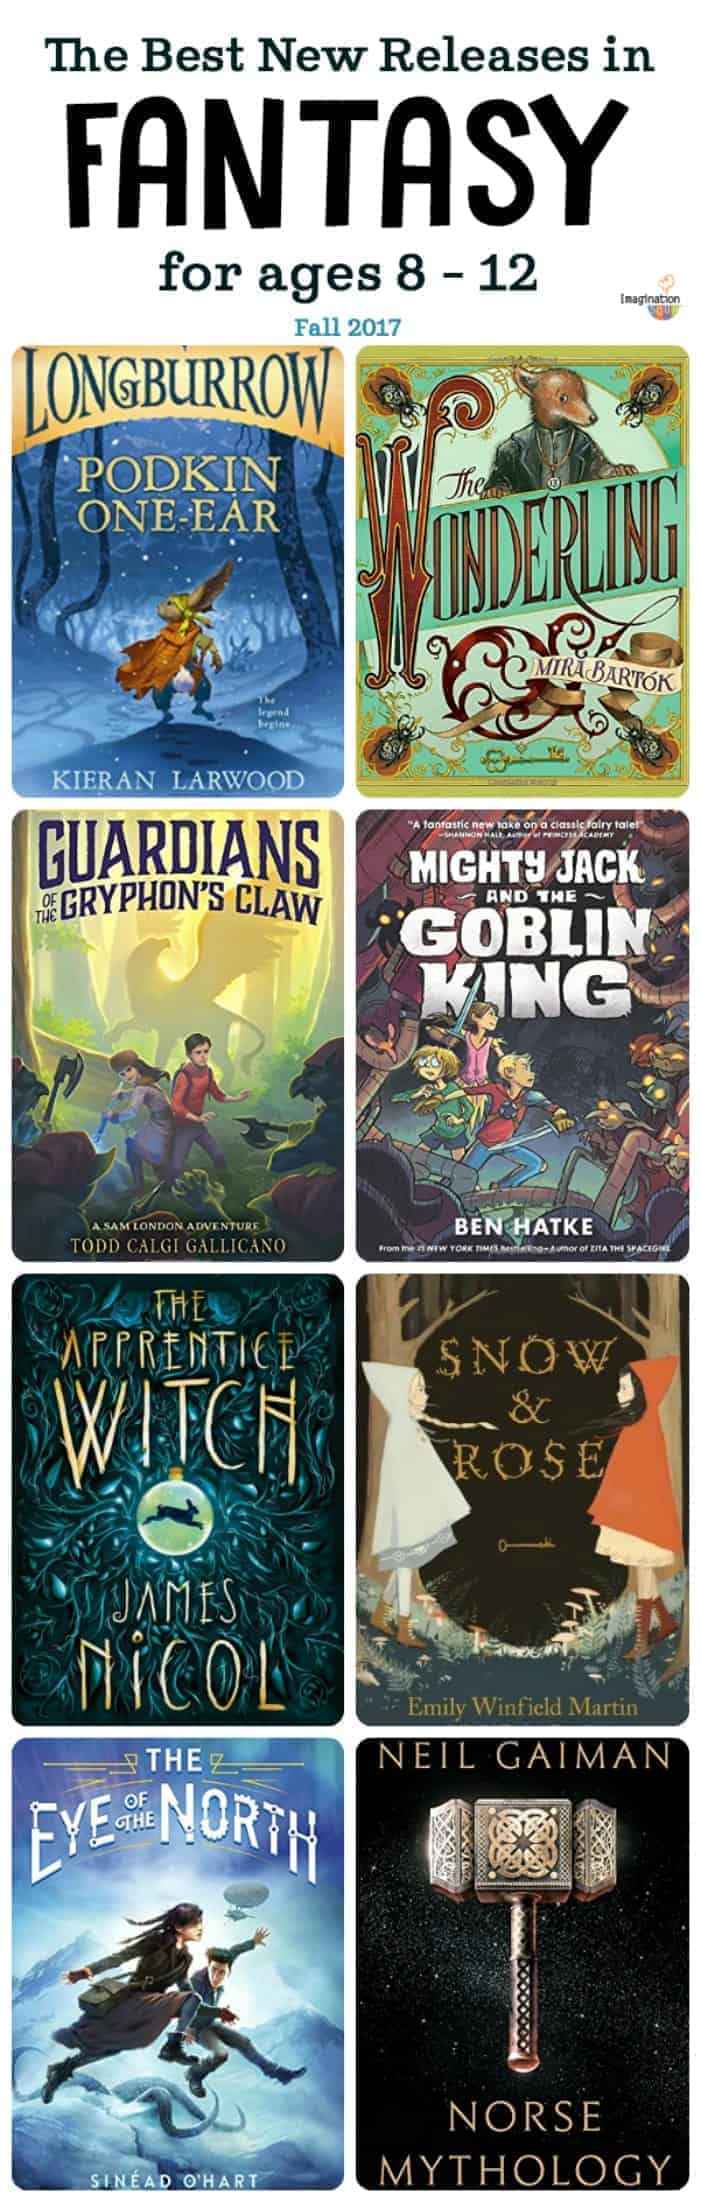 check out these awesome fantasy book new releases for elementary and middle school kids